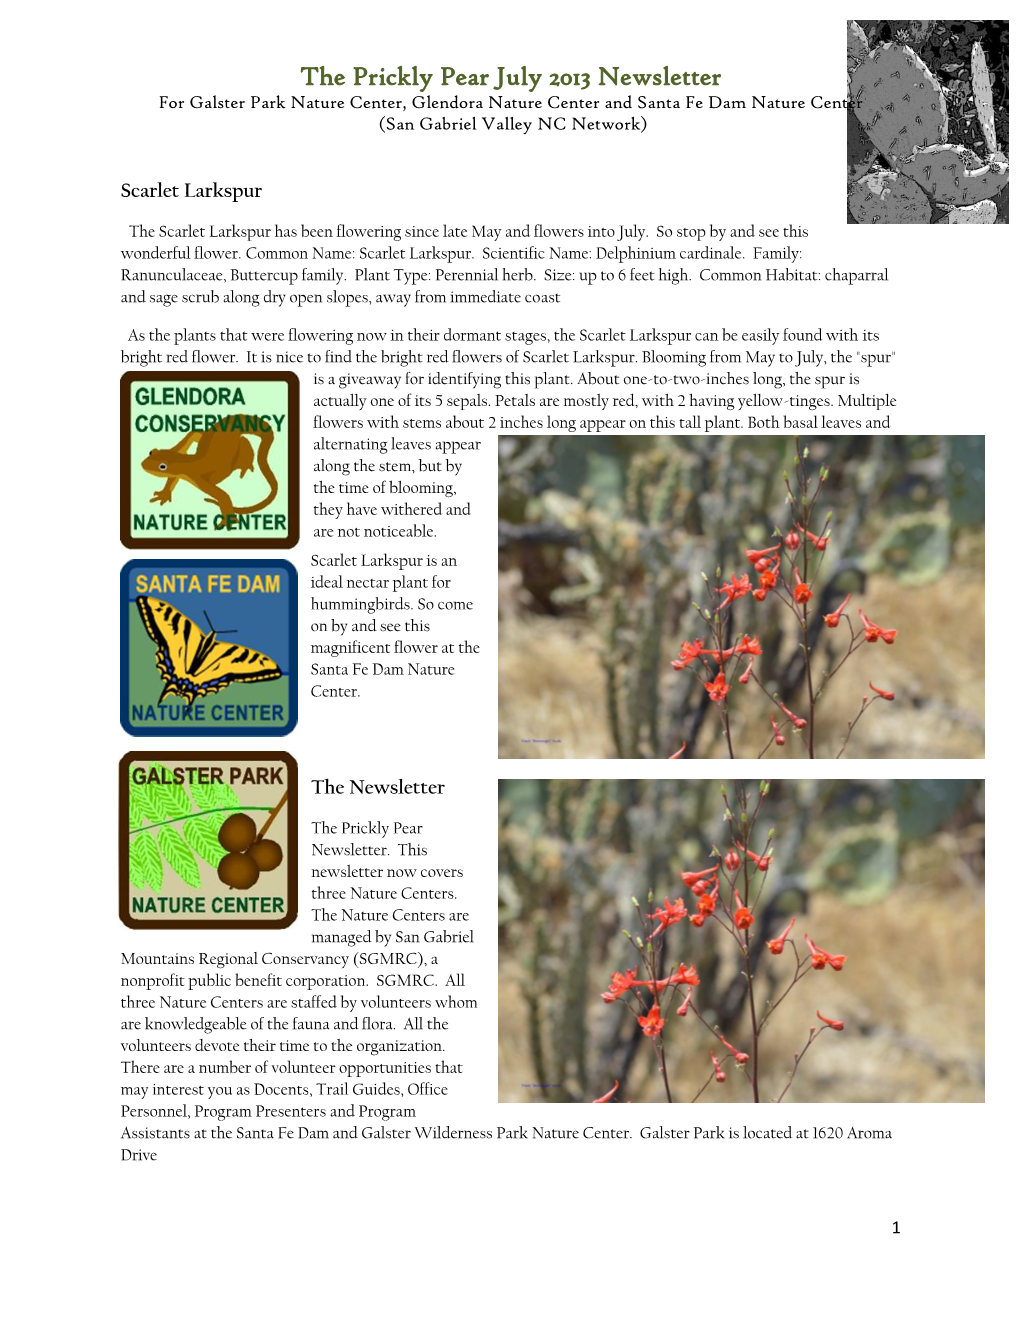 The Prickly Pear July 2013 Newsletter for Galster Park Nature Center, Glendora Nature Center and Santa Fe Dam Nature Center (San Gabriel Valley NC Network)